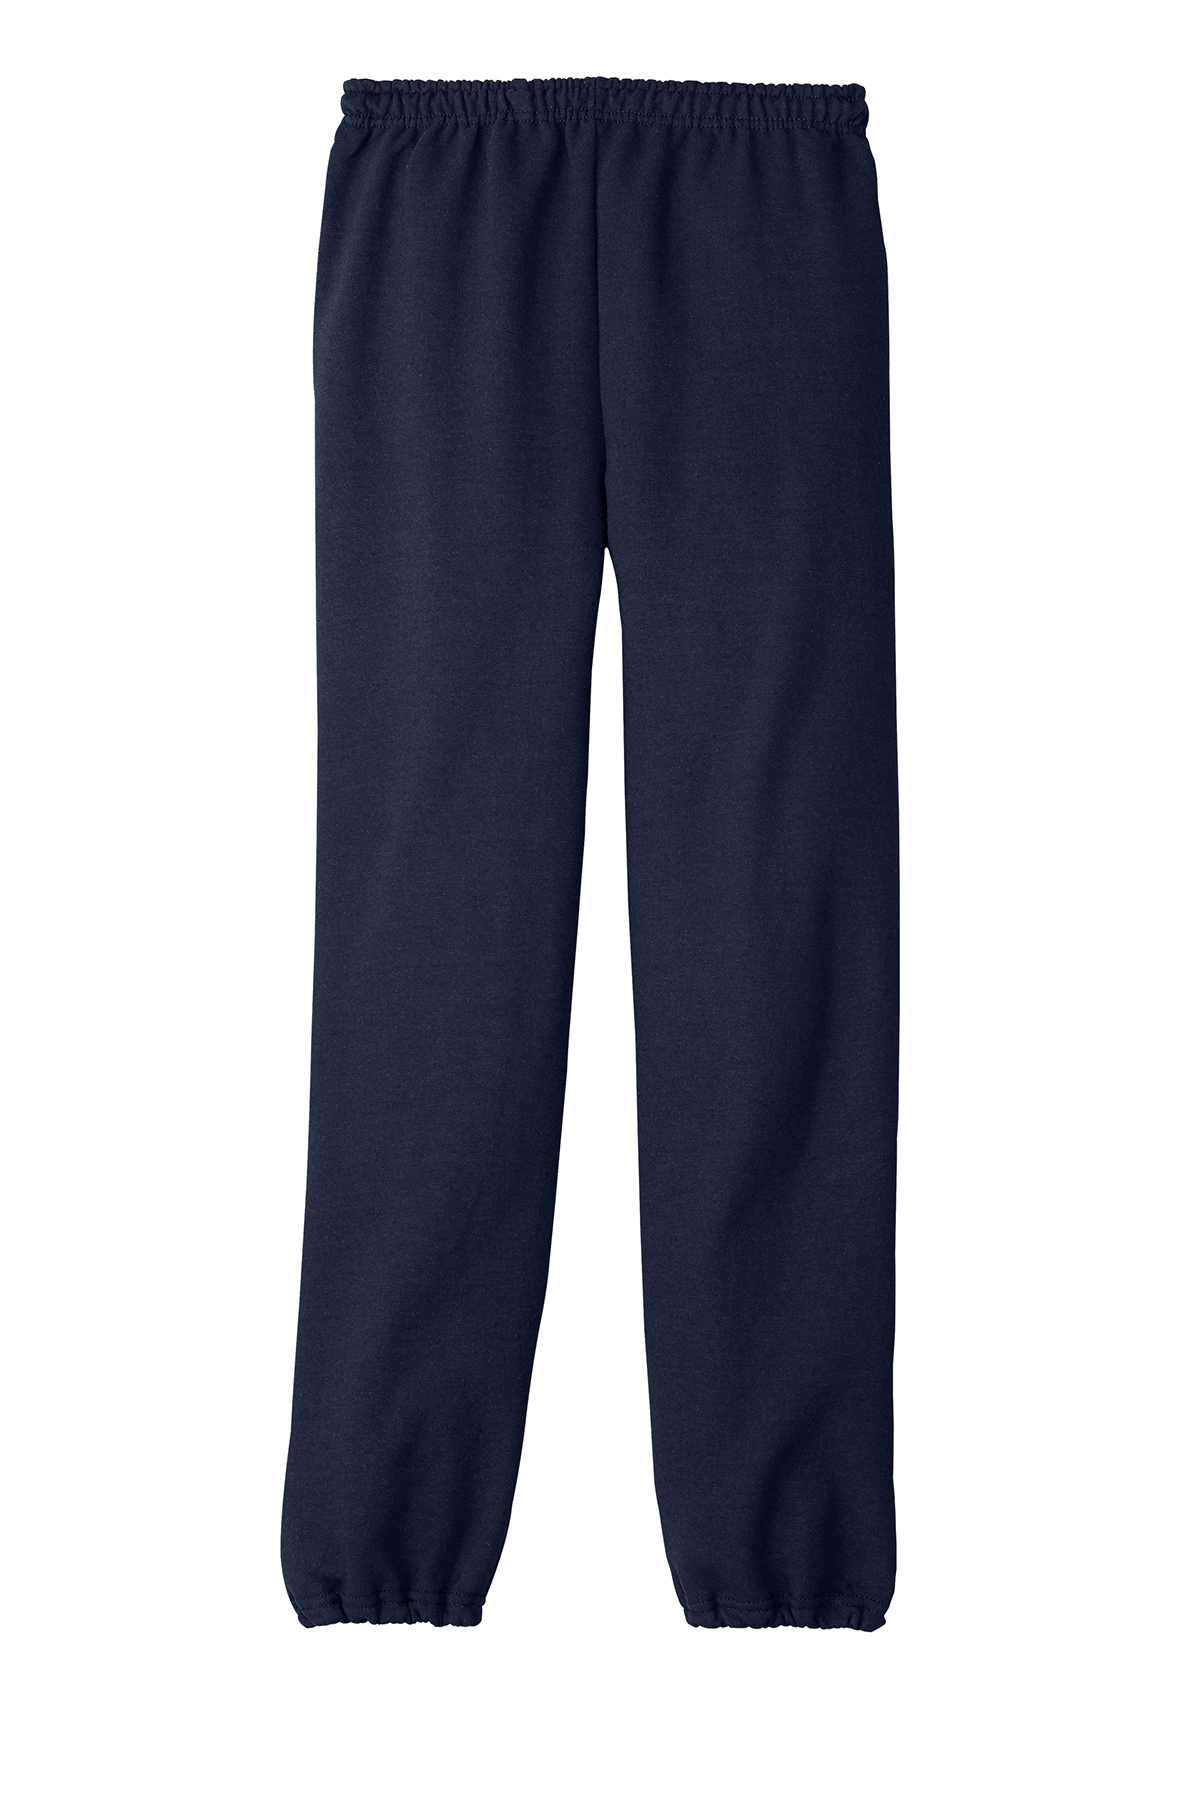 ESA - Adult navy color sweat pant with logo.